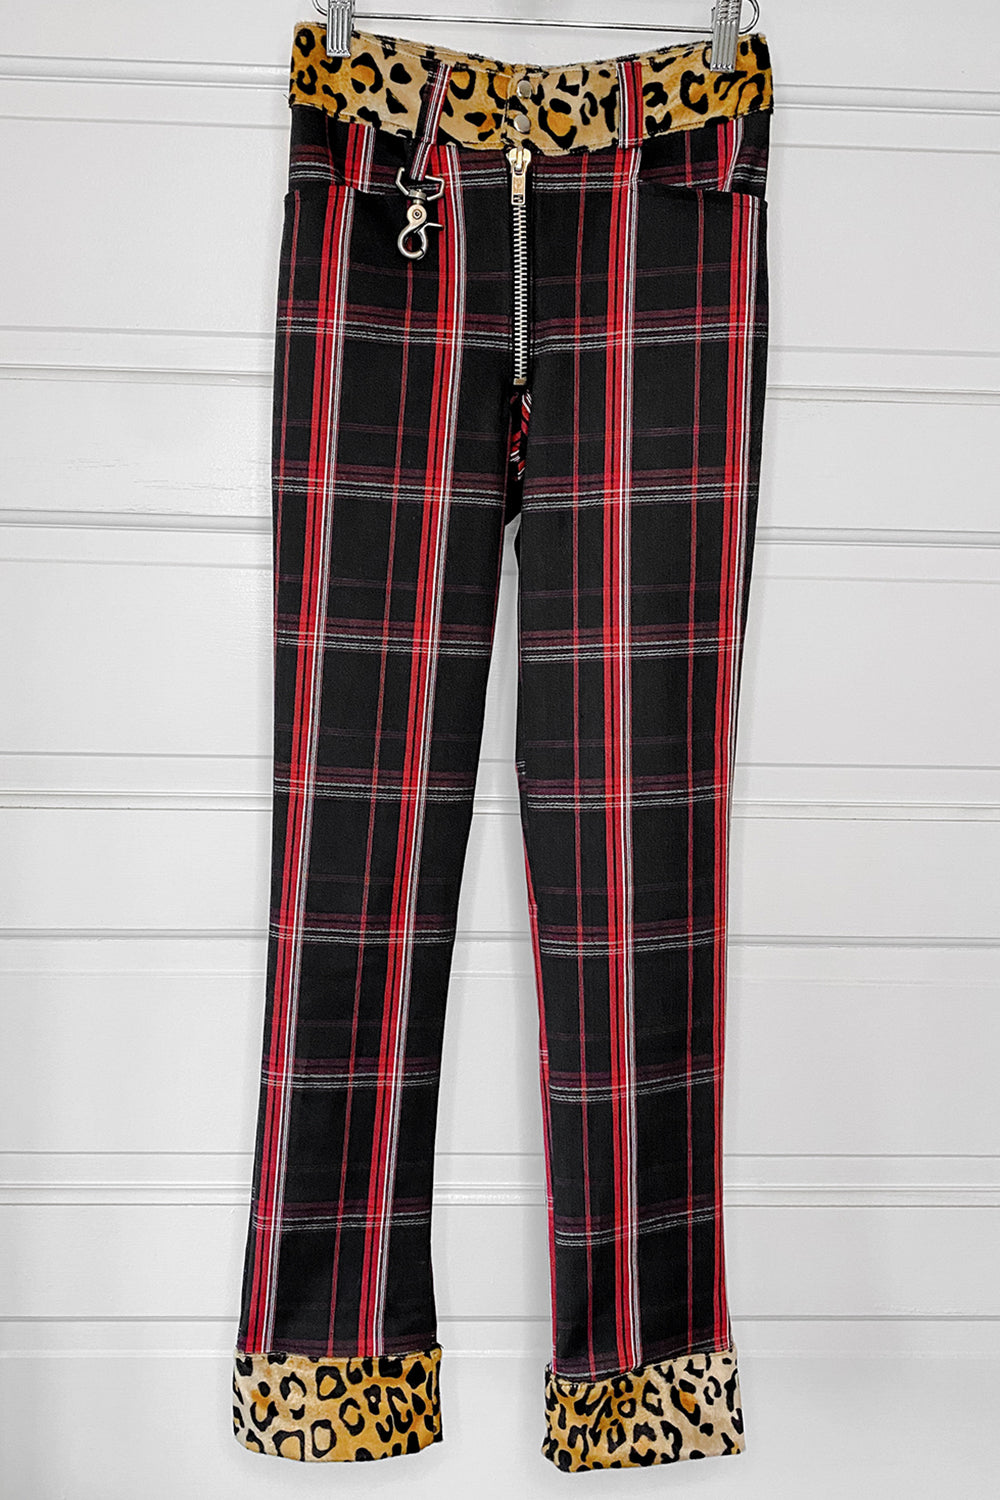 Trainspotting Pants: Leopard/Plaid | Size 24 & 25 In Stock